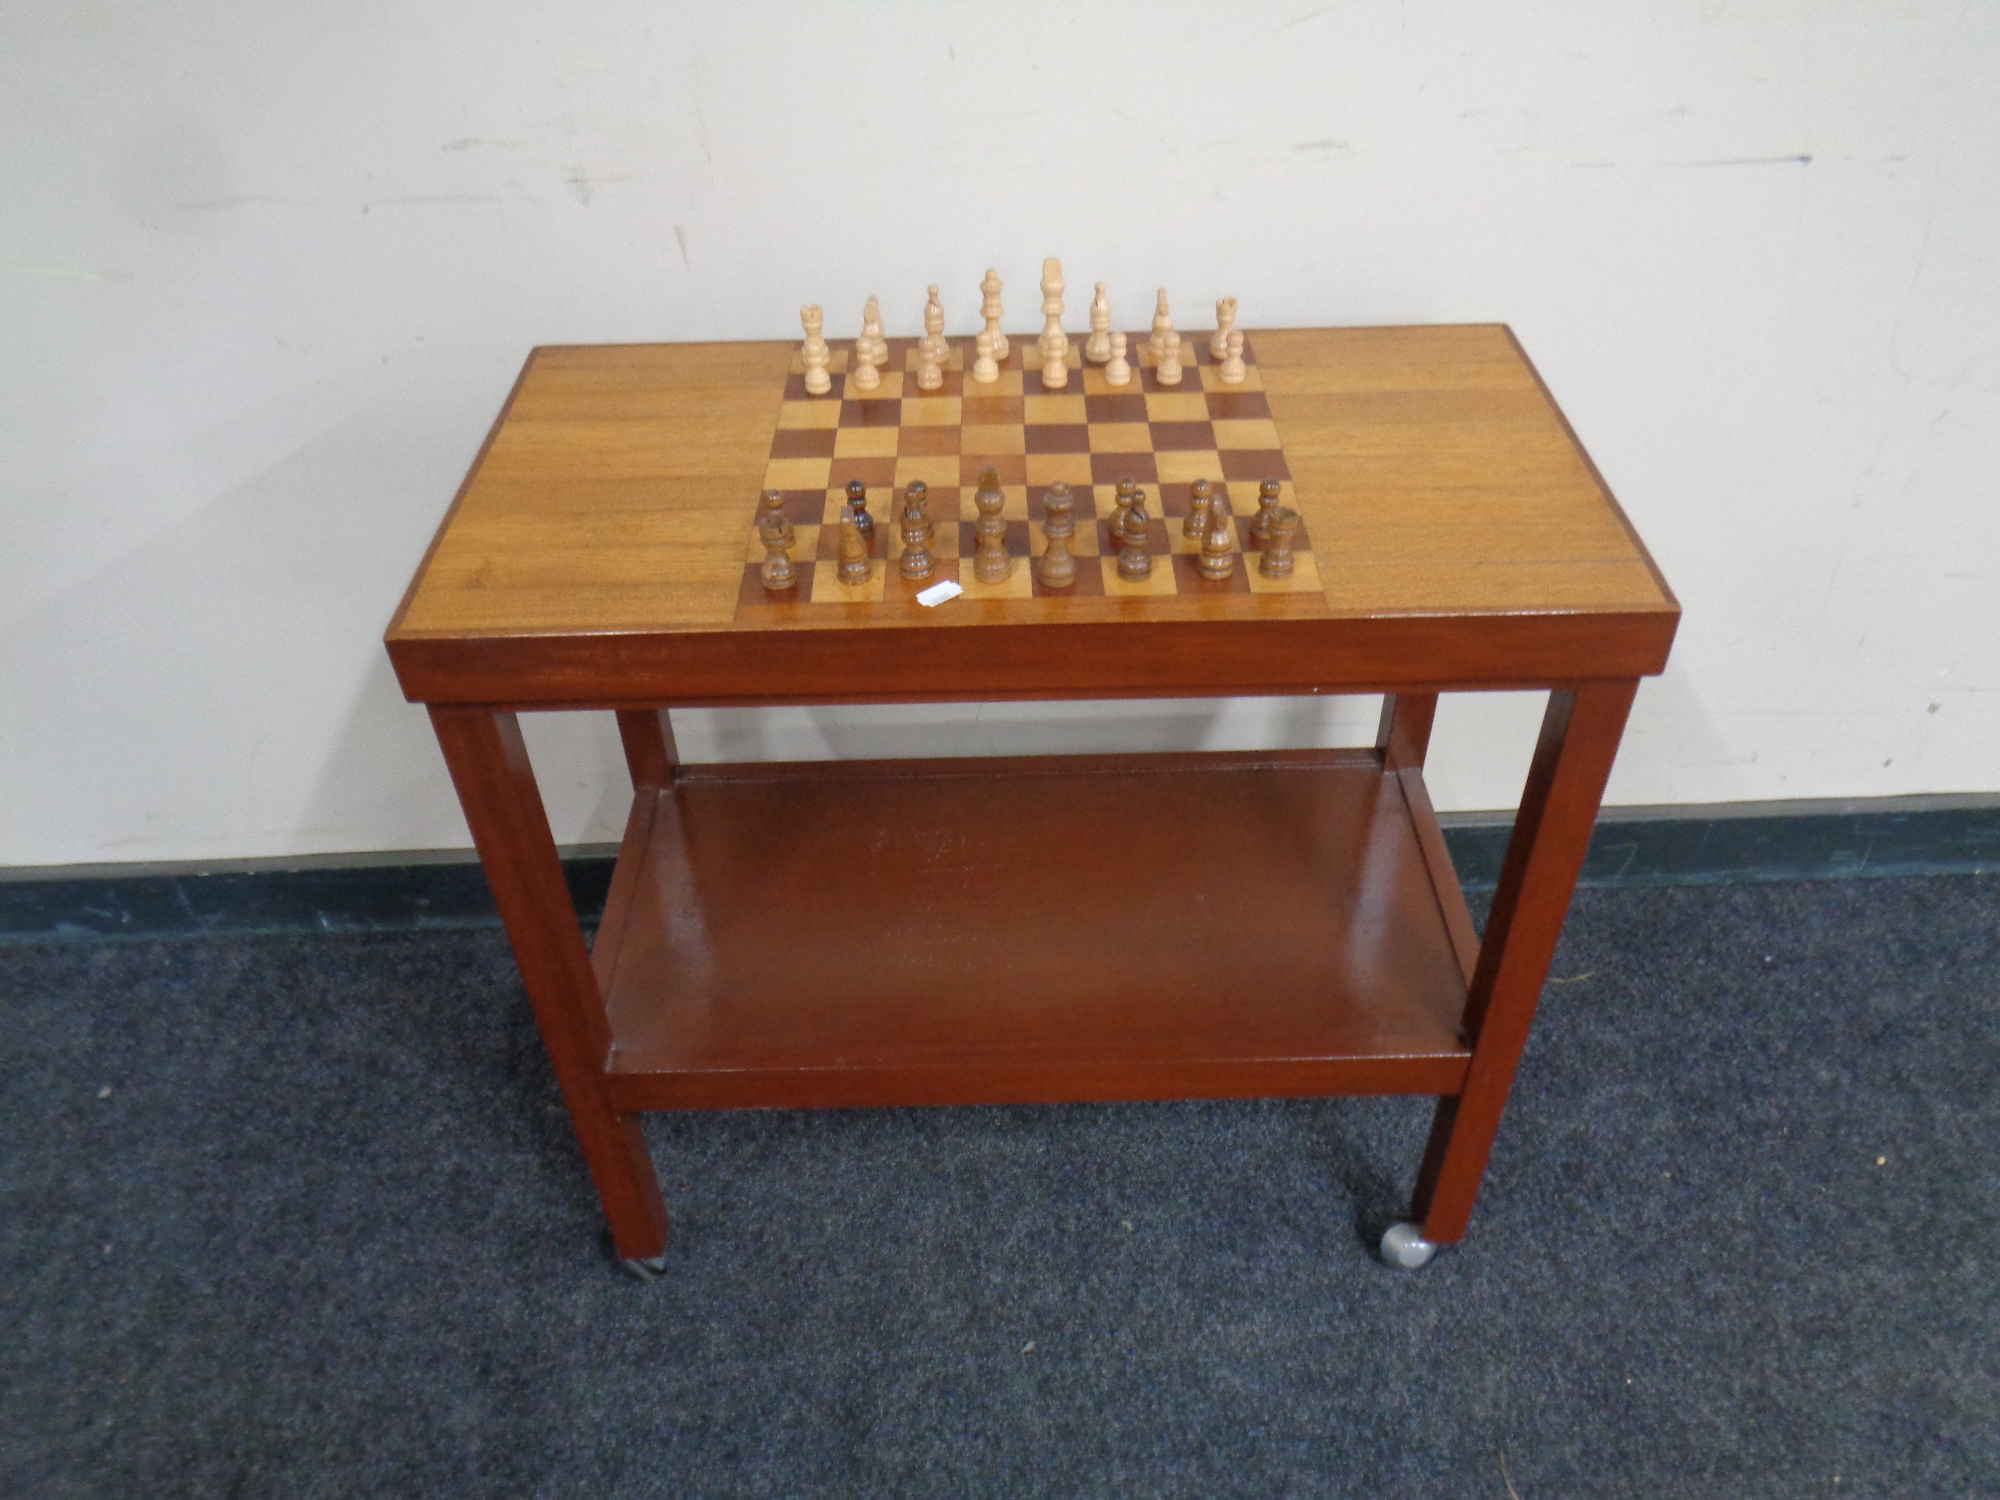 A 20th century two tier tea trolley with chessboard top and pieces